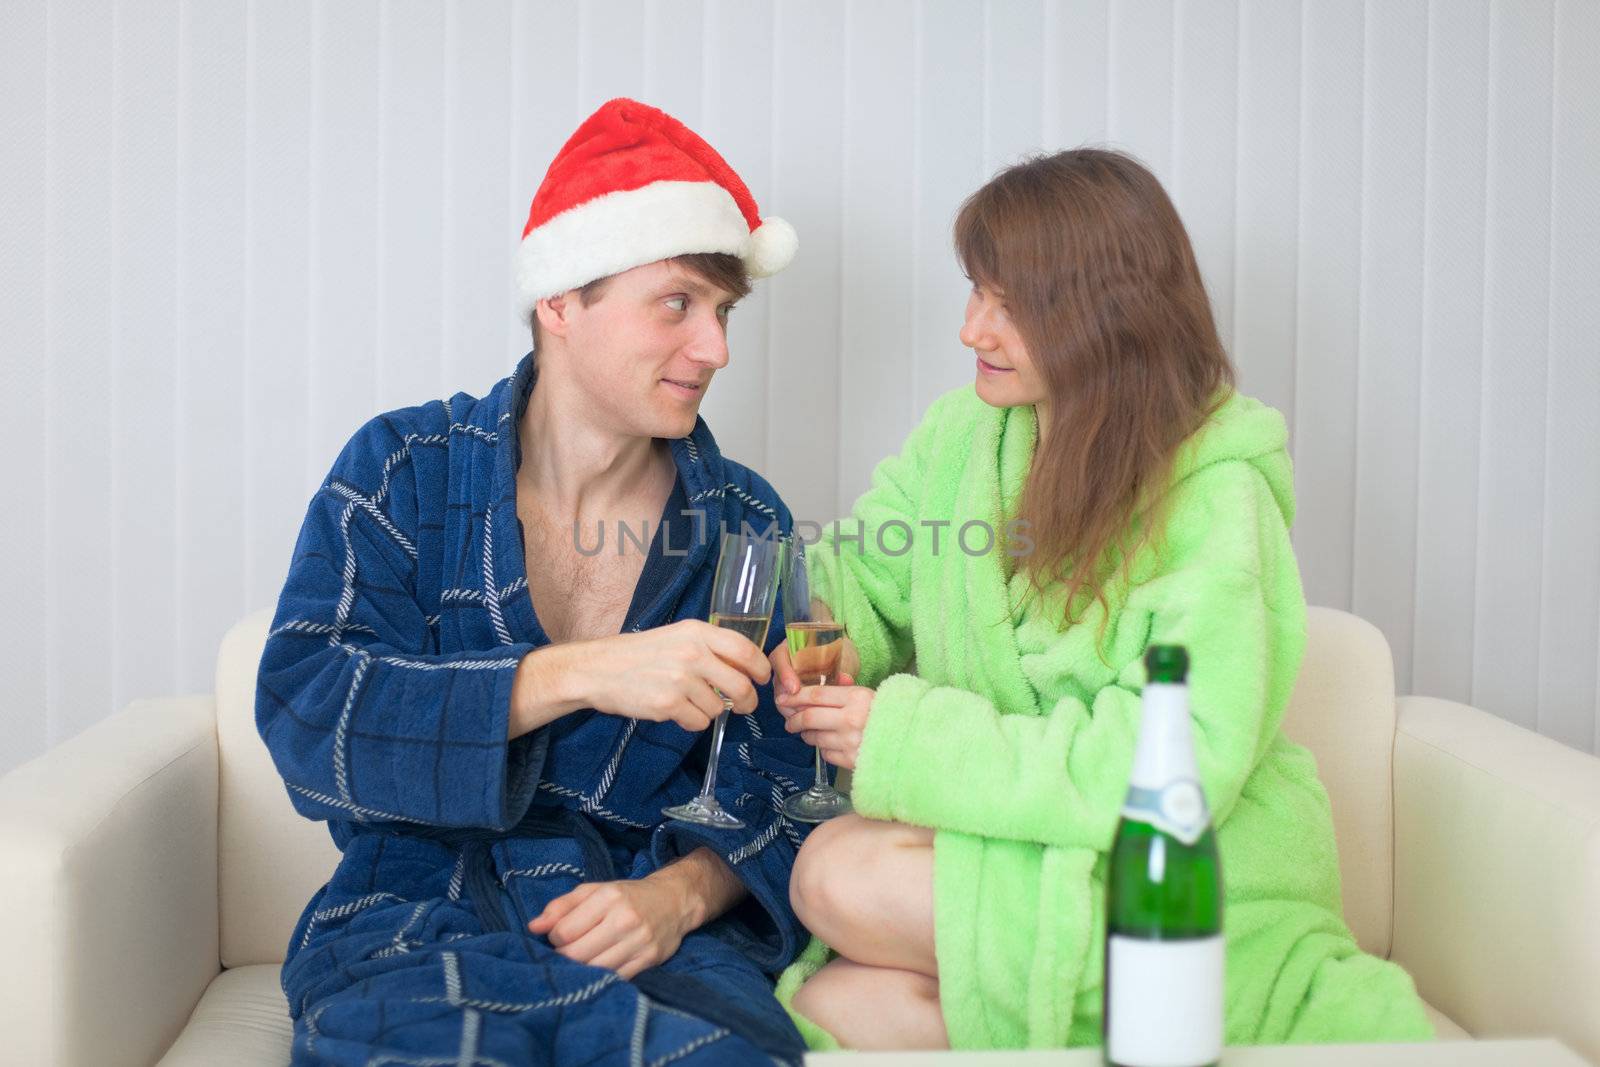 The young couple drinks sparkling wine in dressing gowns on a sofa